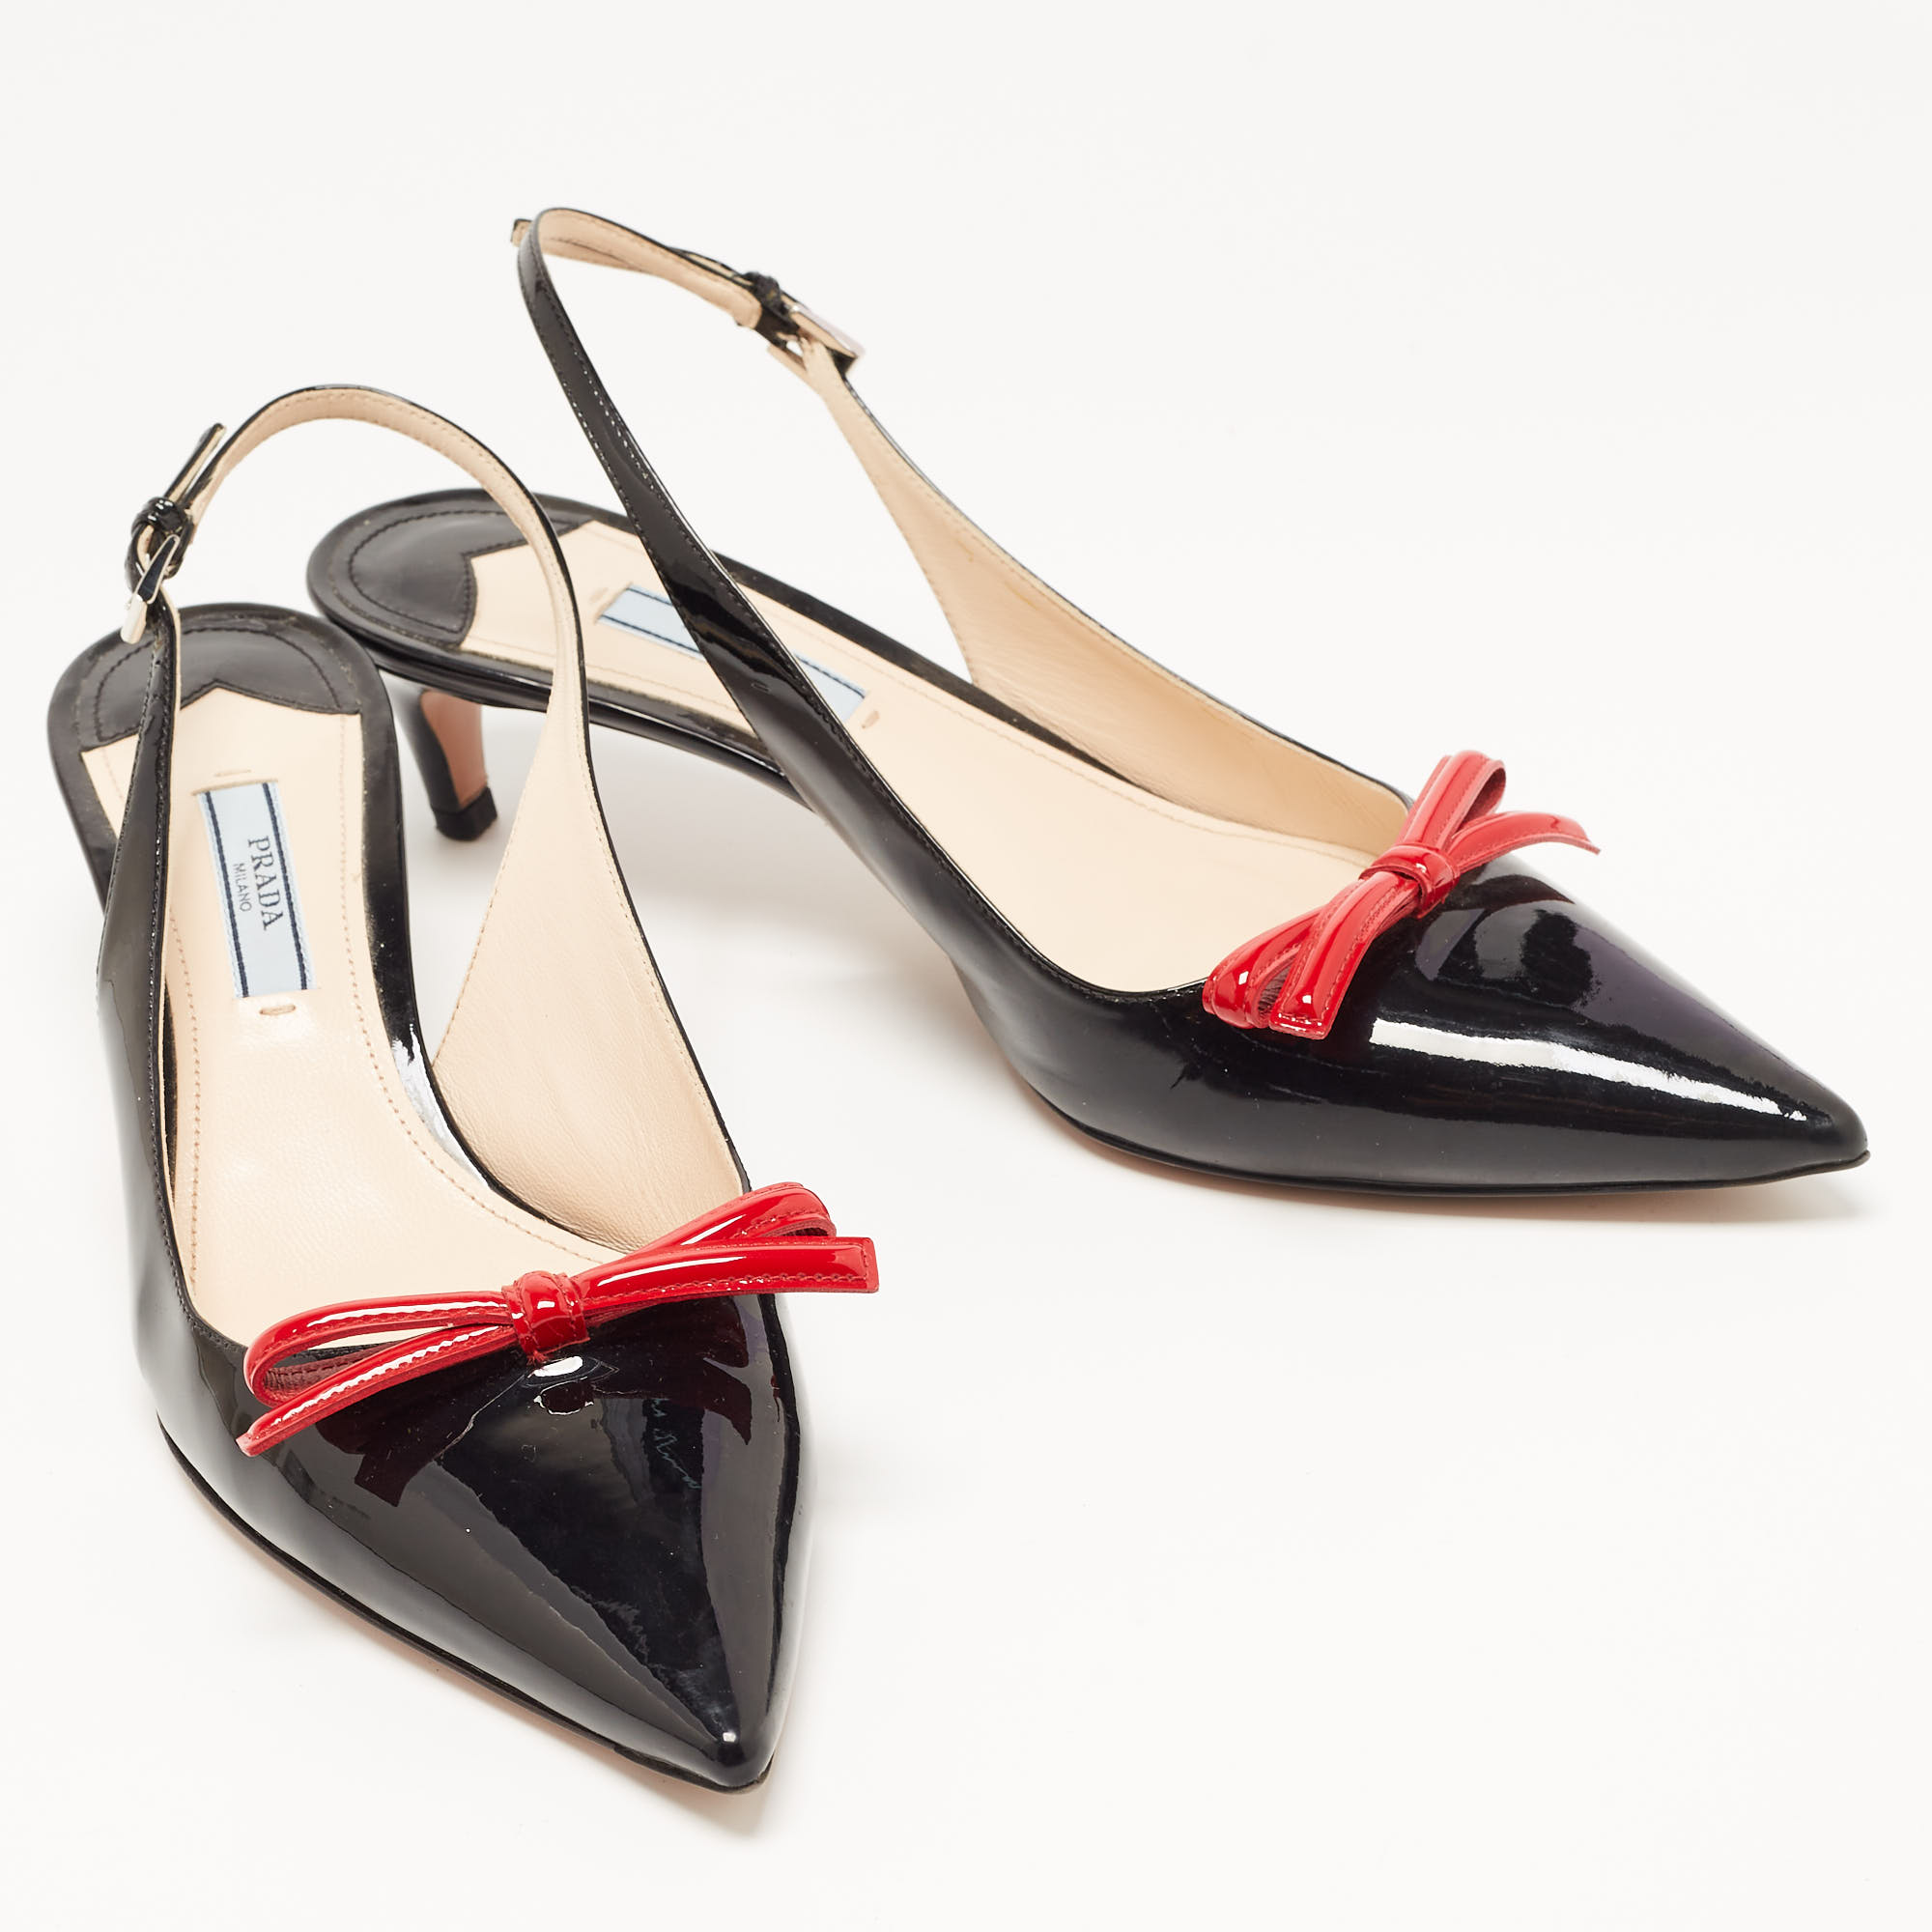 Prada Black/Red Patent Leather Bow Pointed Toe Slingback Sandals Size 40.5